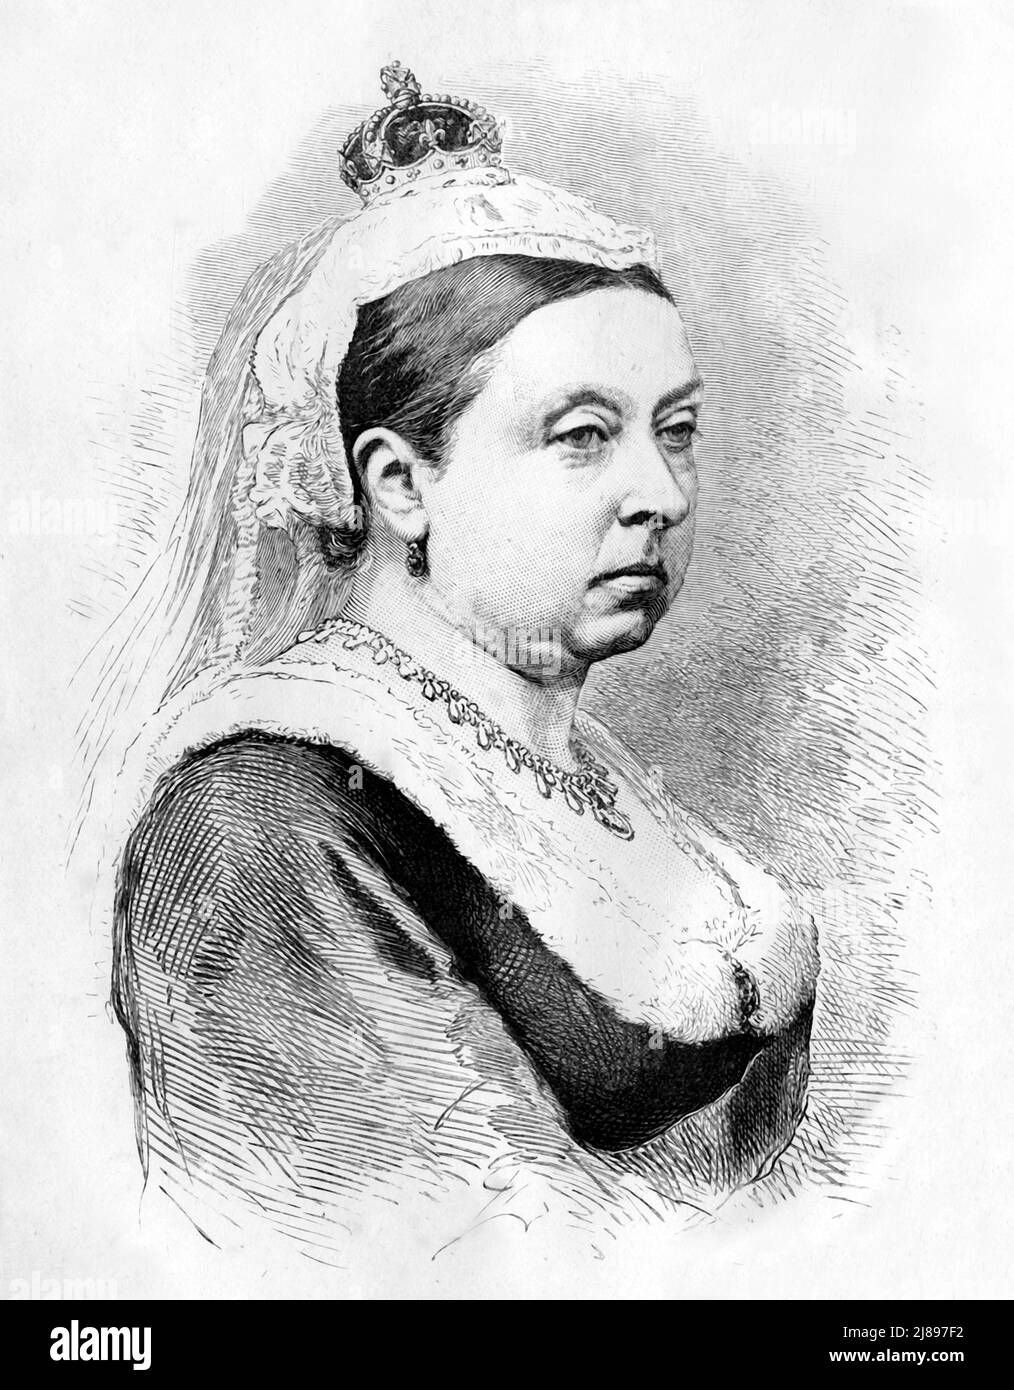 'Victoria, Queen of England and Empress of India', c1891. From &quot;Cassell's Illustrated History of India Vol. II.&quot;, by James Grant. [Cassell Petter &amp; Galpin, London, Paris and New York] Stock Photo